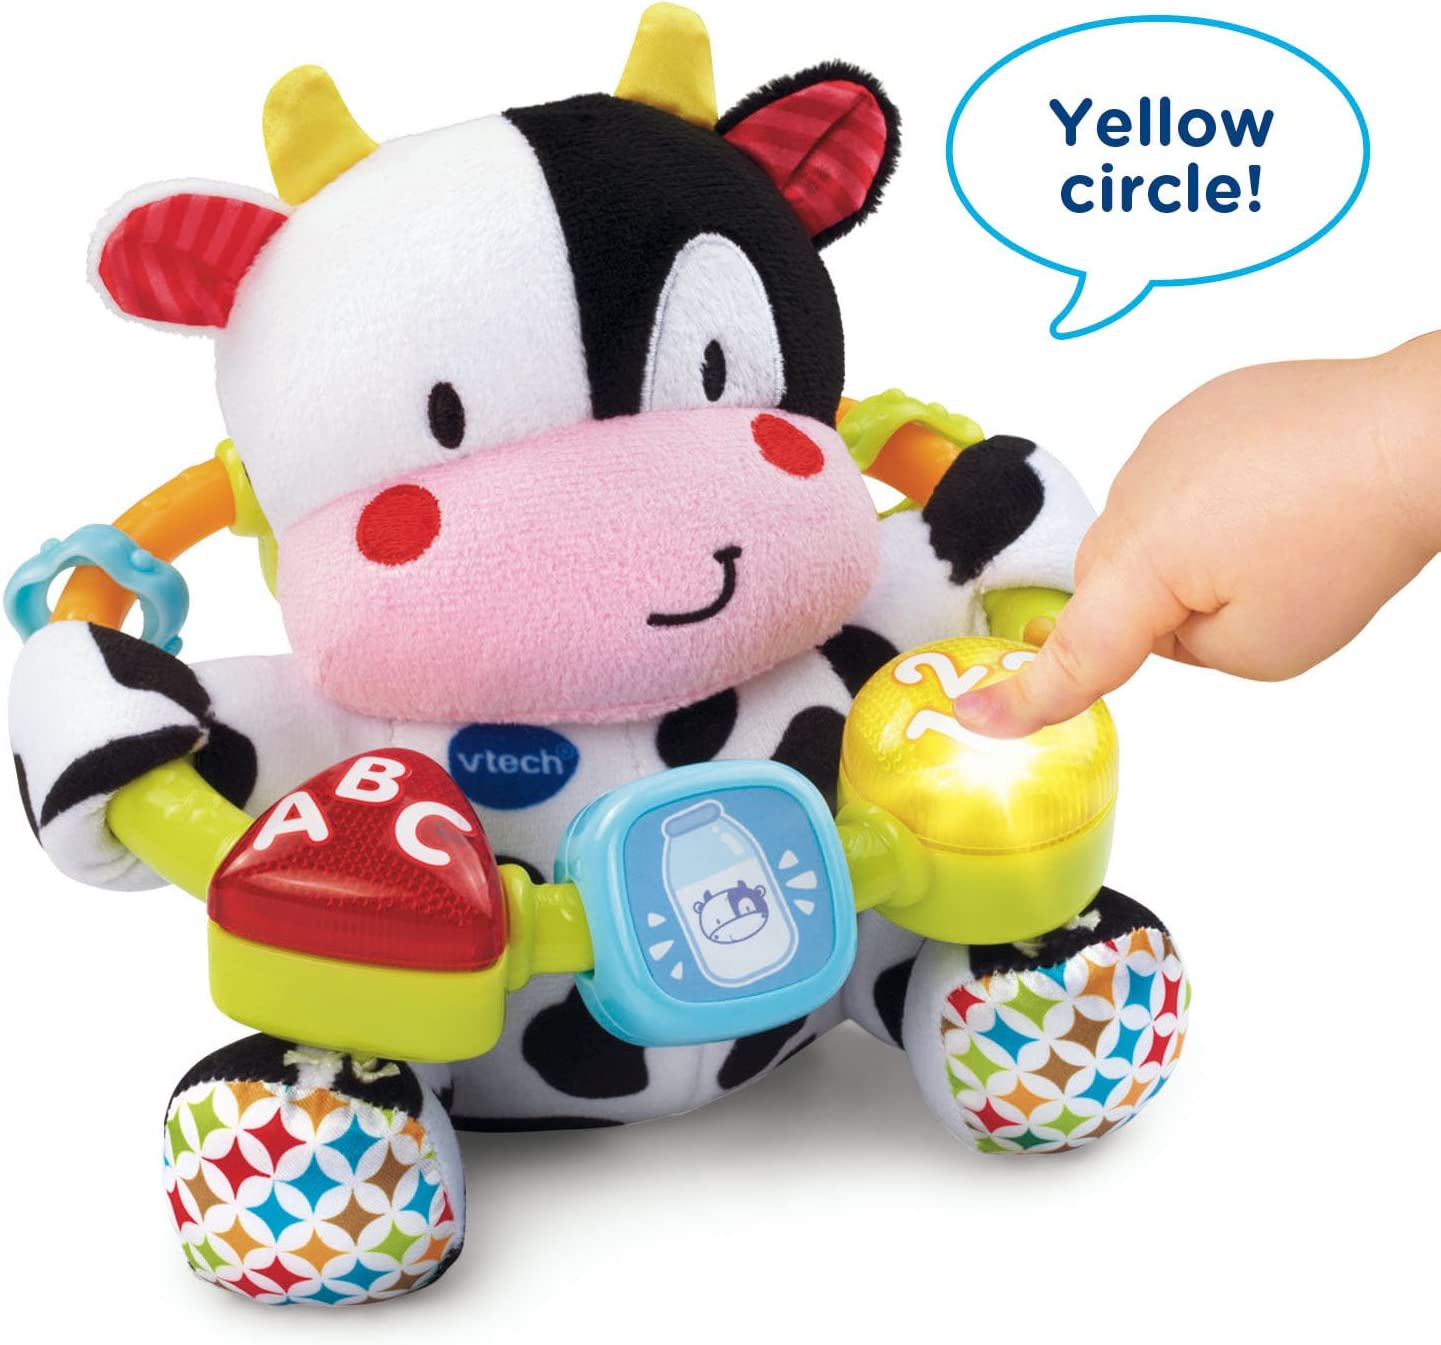 VTech Lil' Critters Moosical Beads, Black - for Ages 0-24 Months